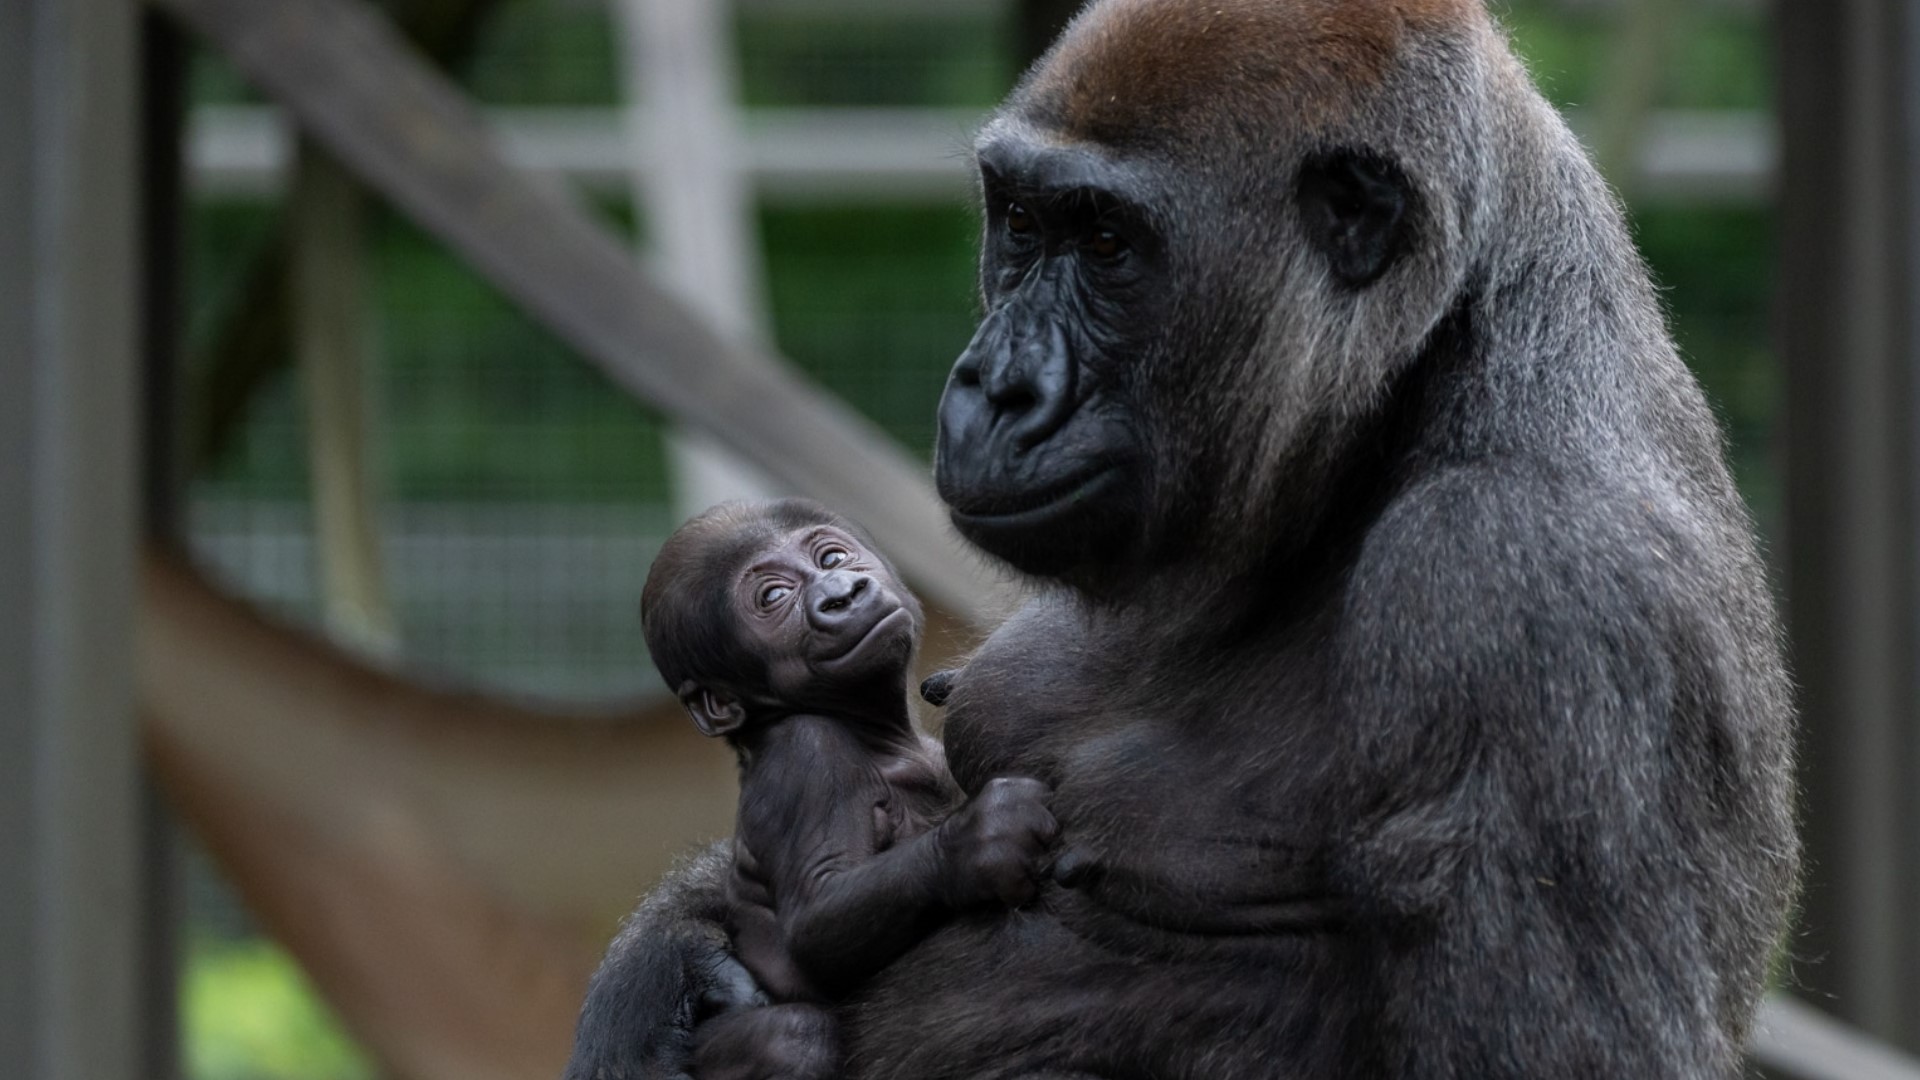 The zoo revealed the name on Tuesday, nearly two months after her surprise birth.